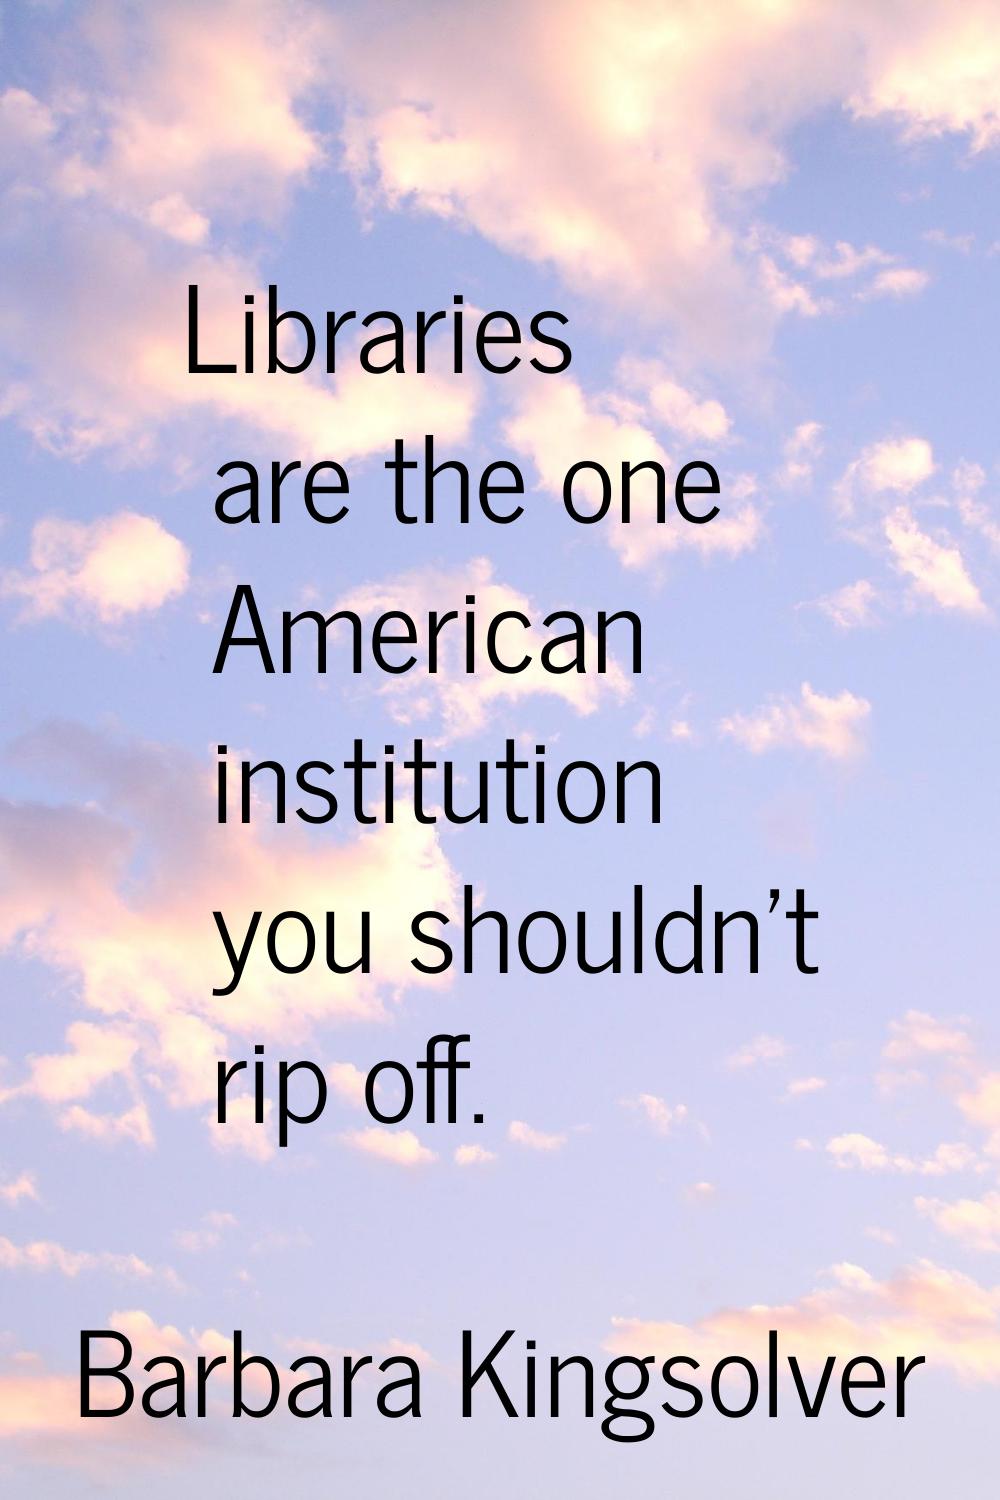 Libraries are the one American institution you shouldn't rip off.